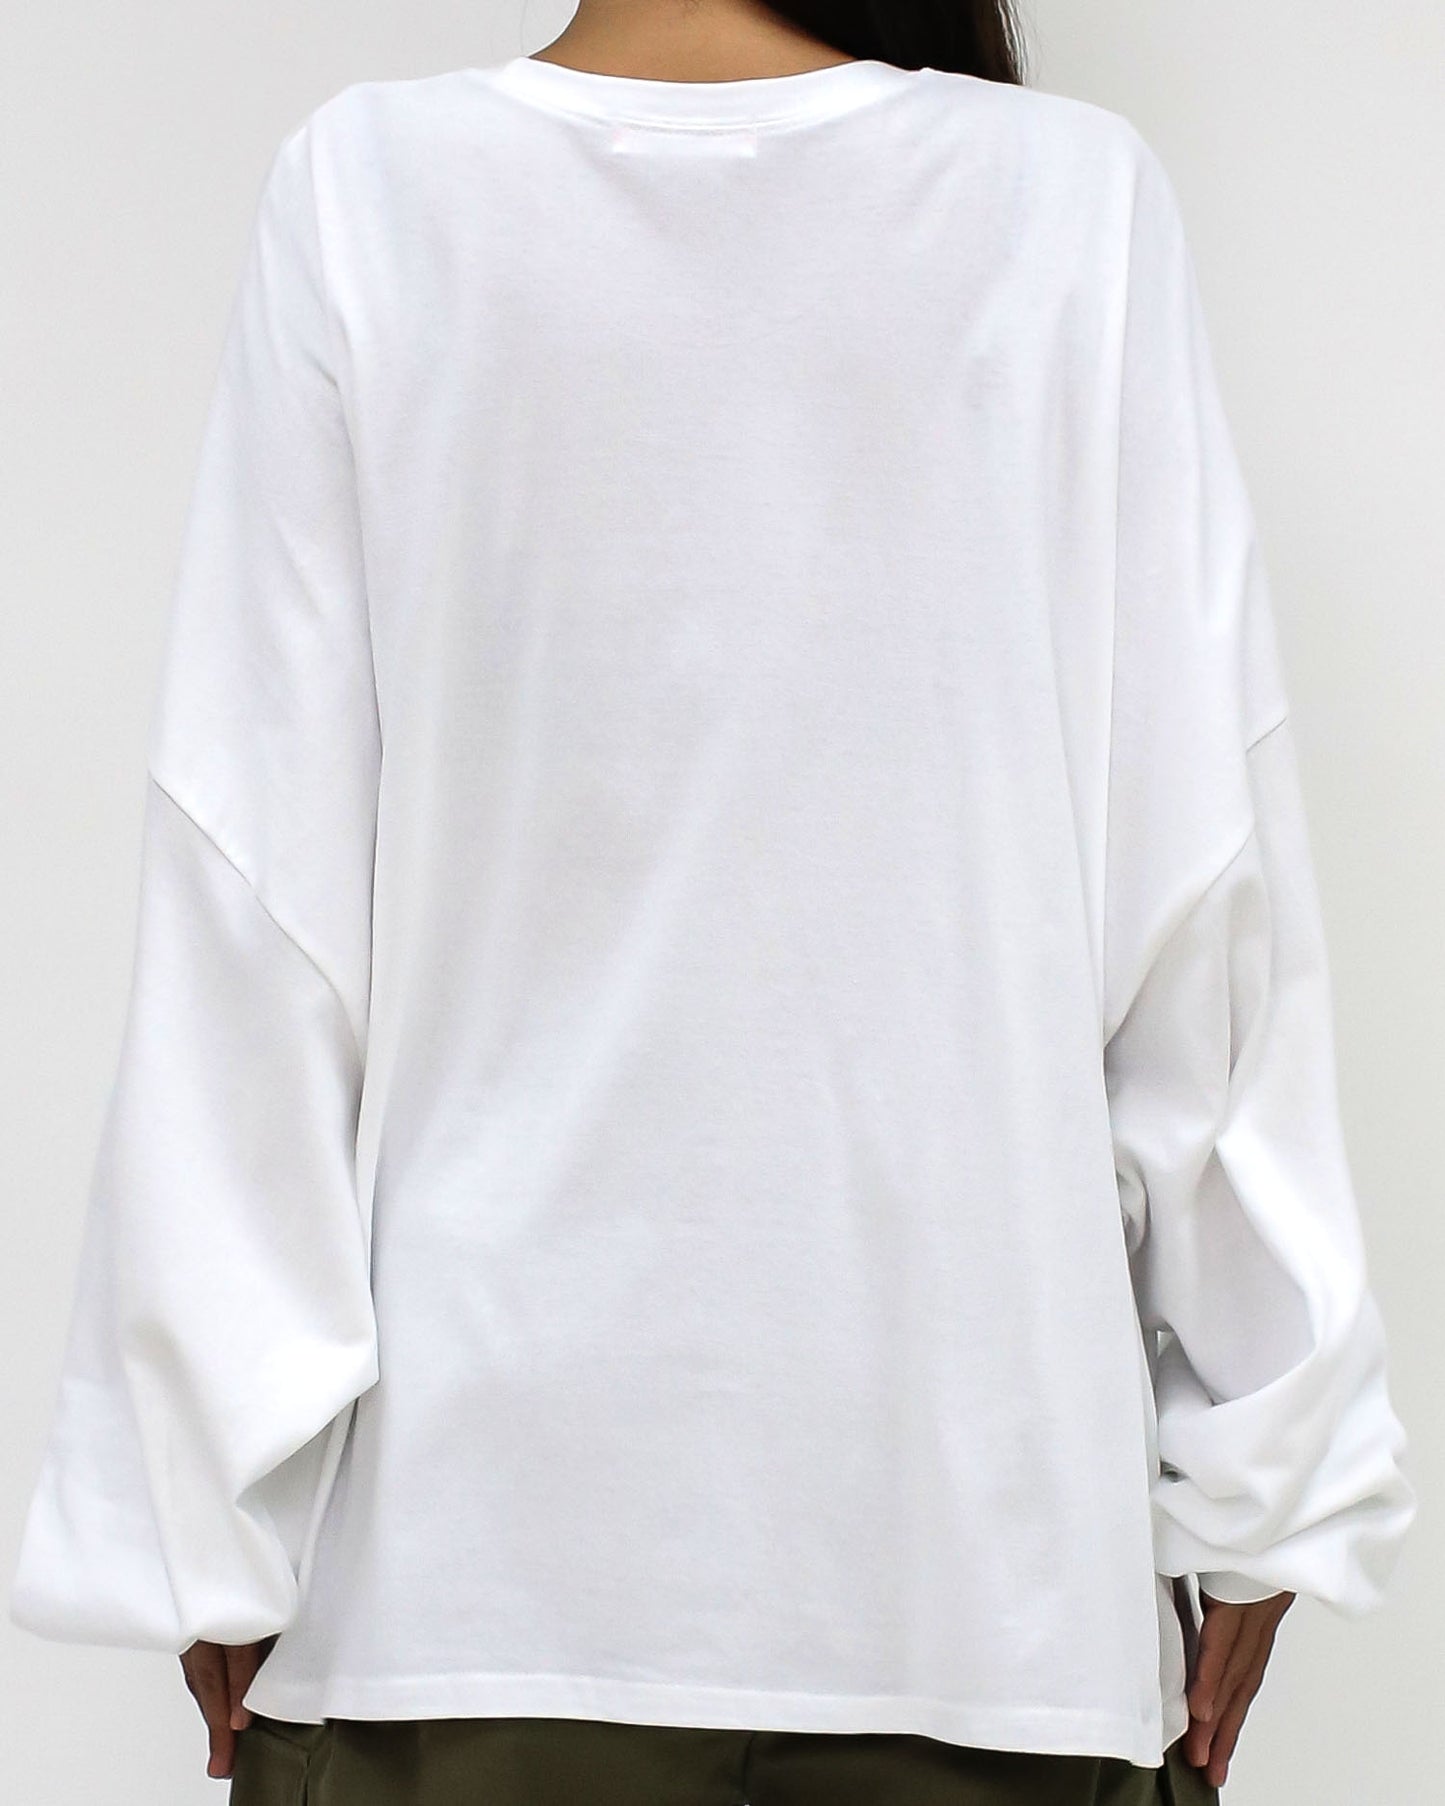 ivory split front w/ tag long sleeves tee